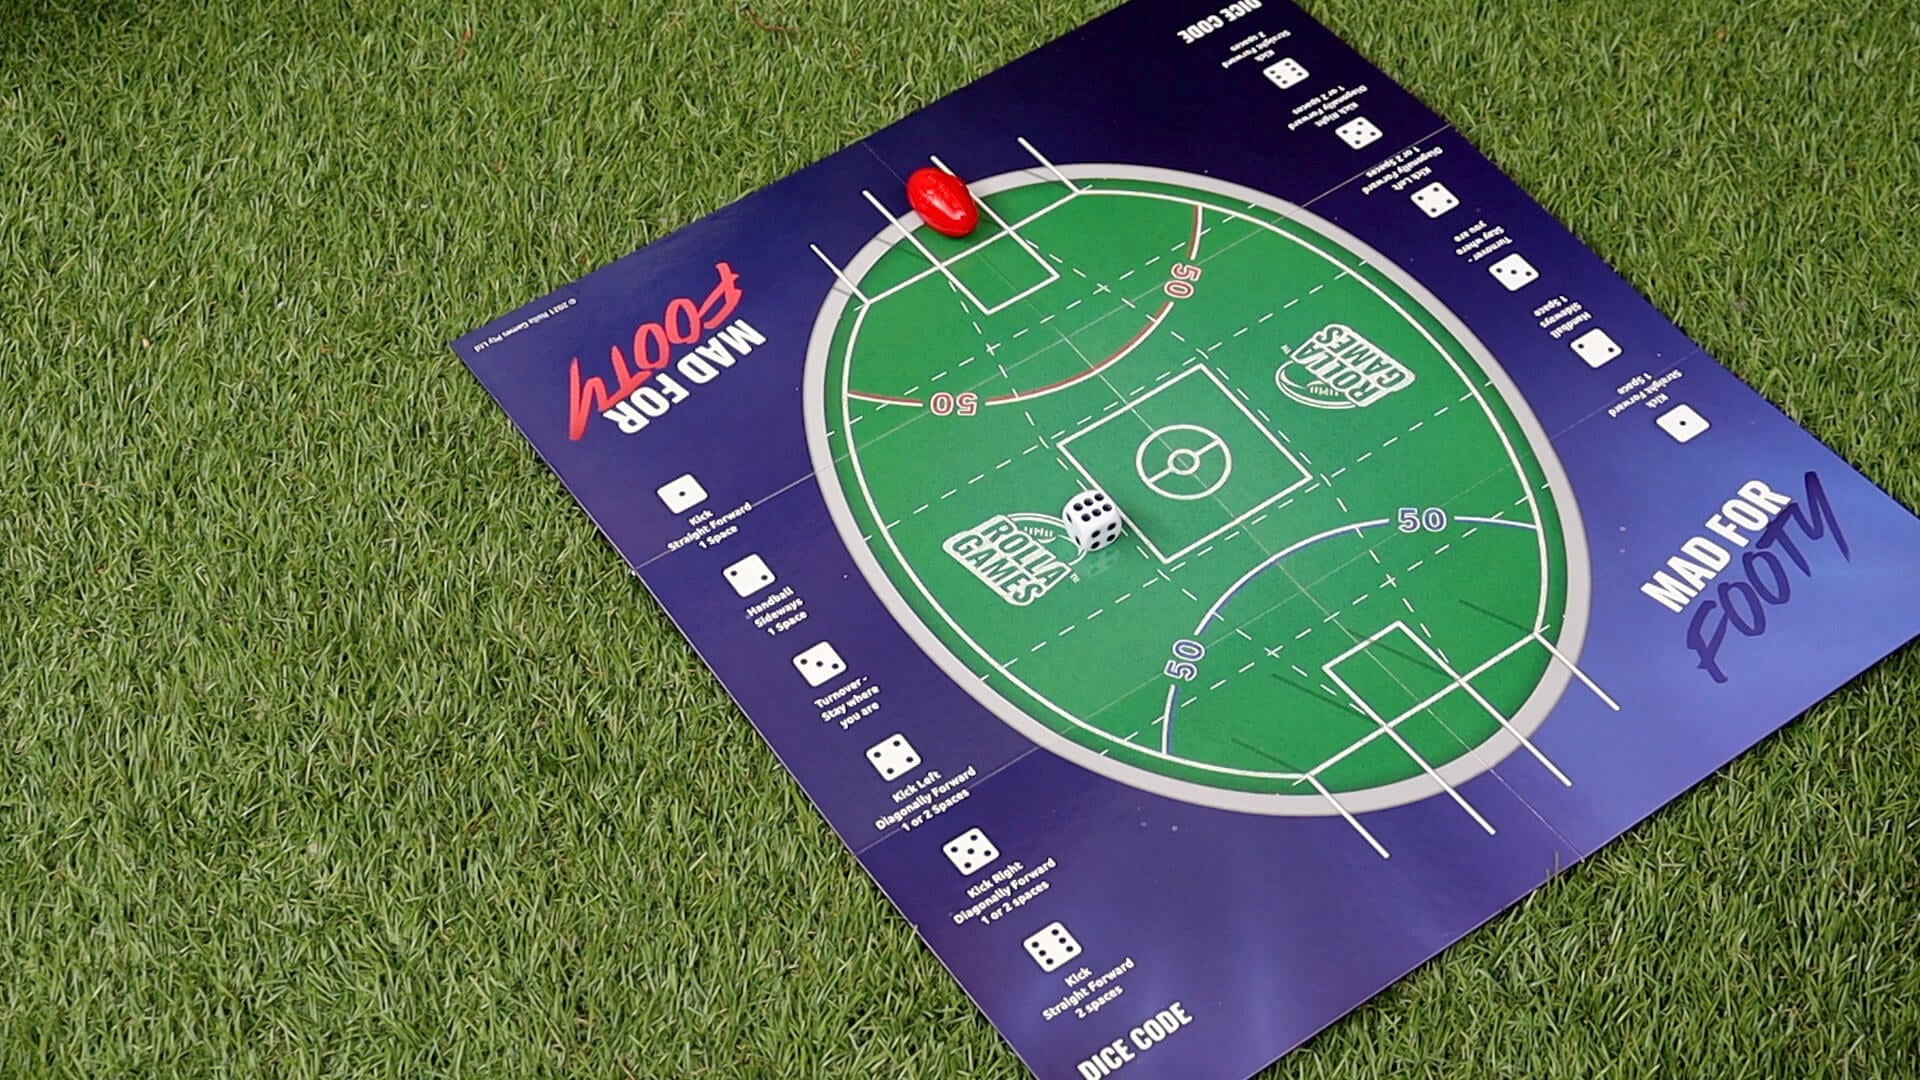 How to score goals in AFL football board game.